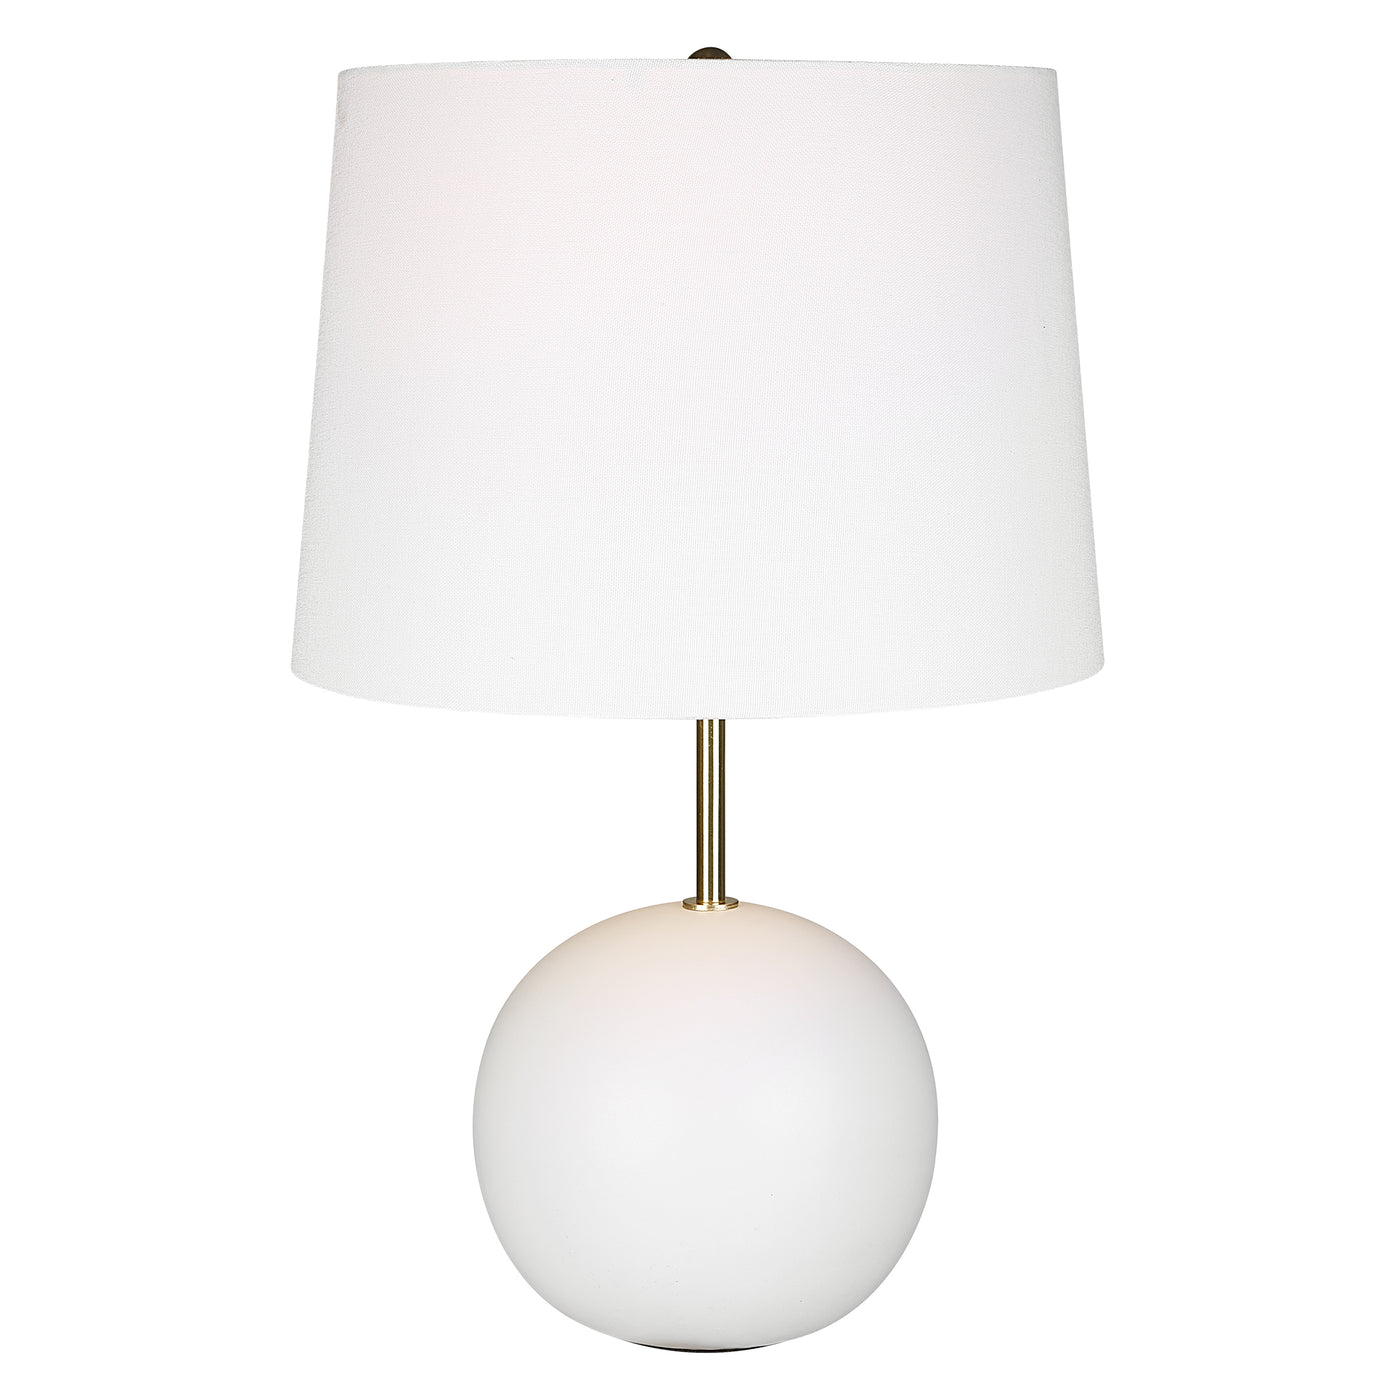 The Cancun - Table Lamp with White Ceramic Base